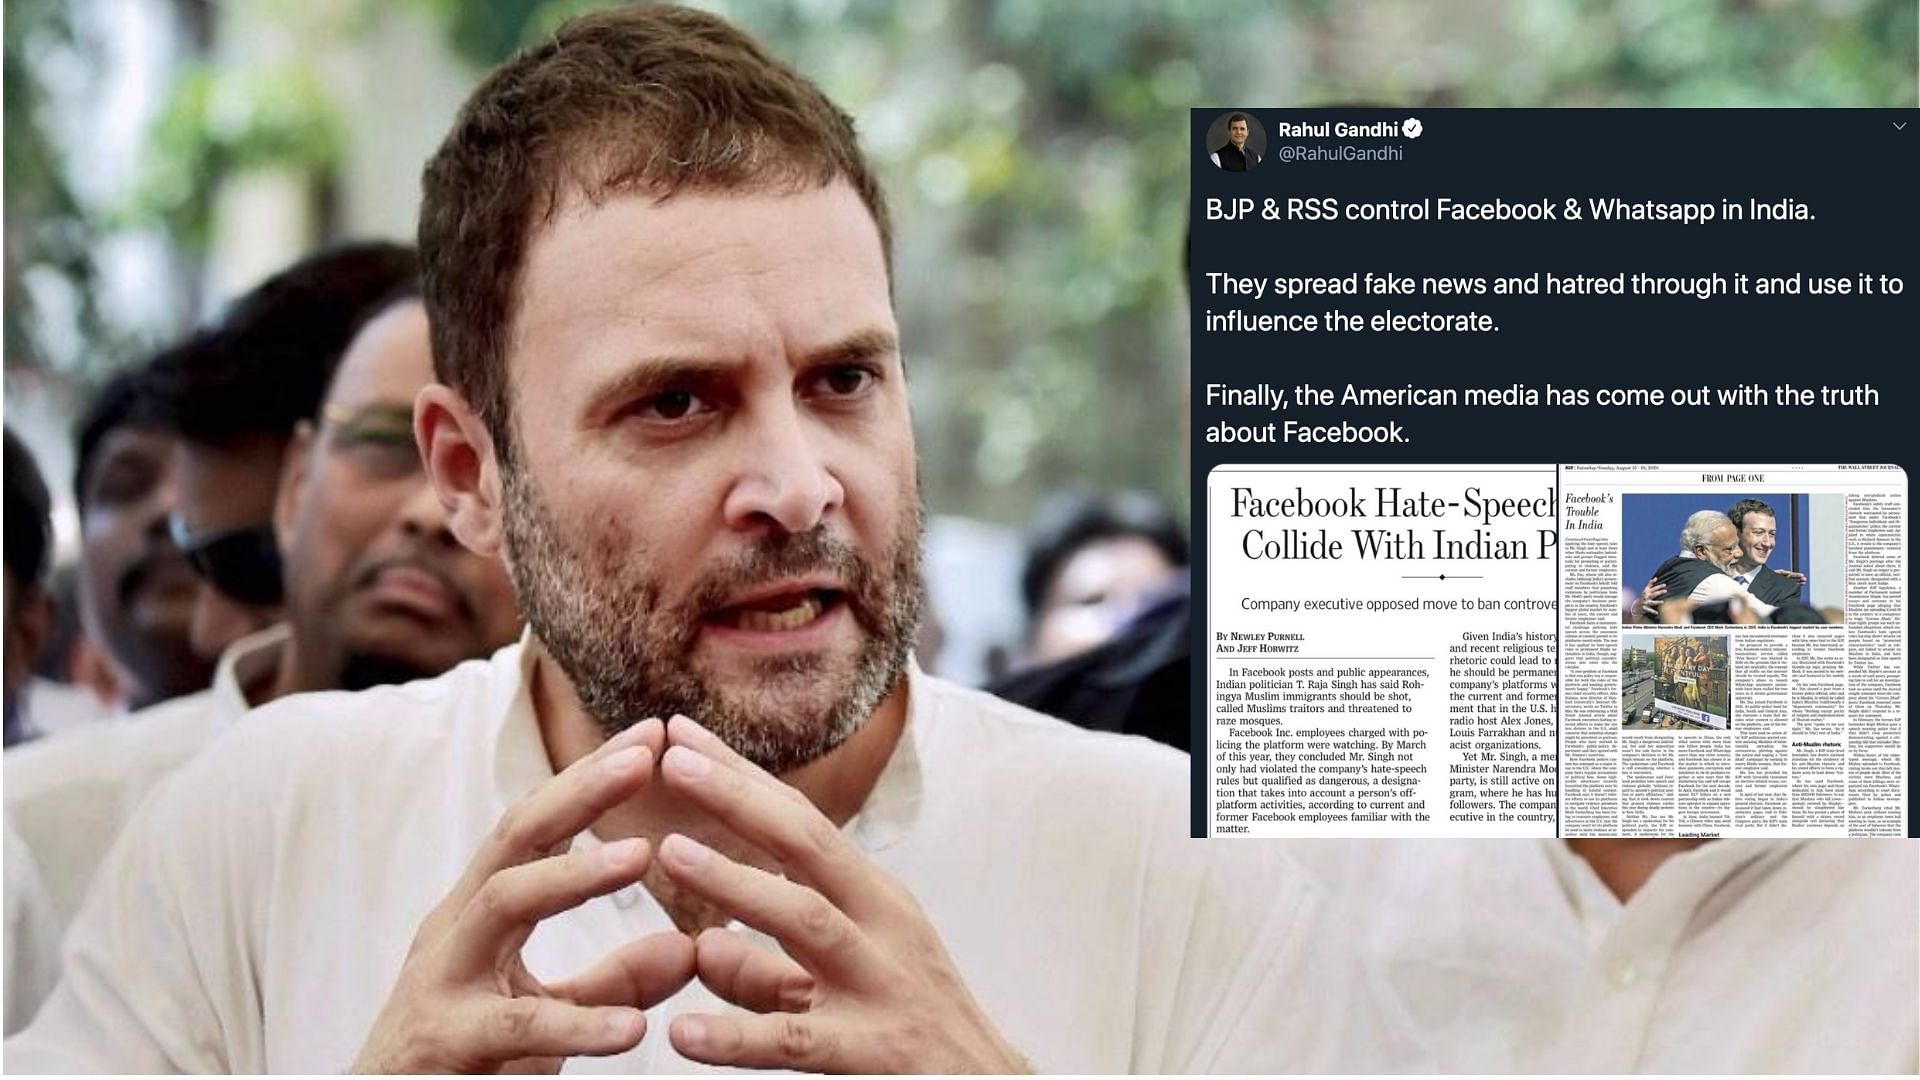 Gandhi posted in response to a Wall Street Journal report, ‘FB Hate-Speech Rules Collide With Indian Politics’.